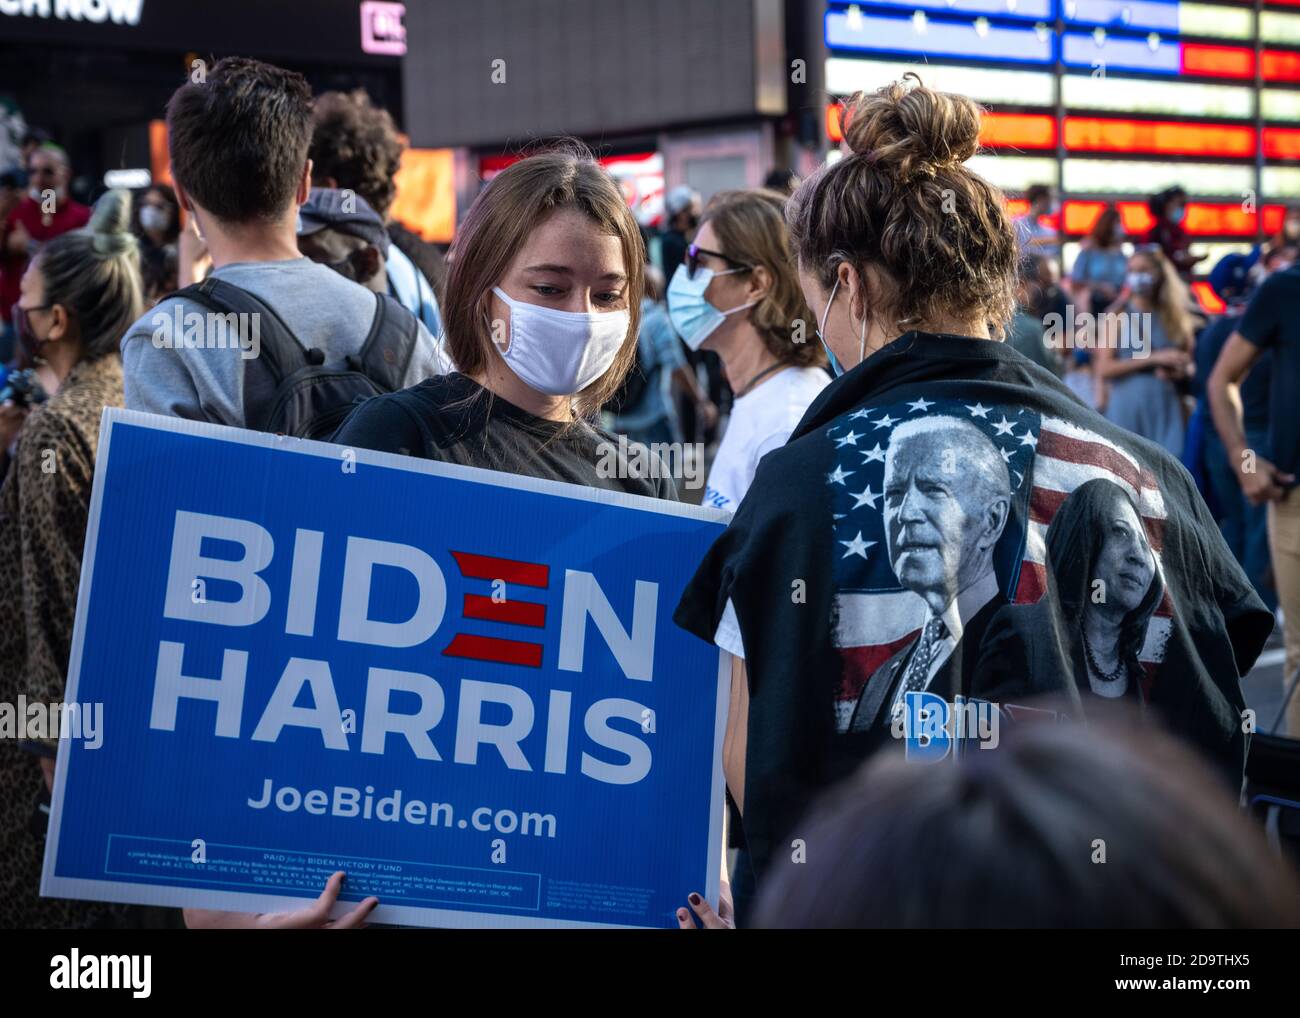 New York, USA. 7th Nov, 2020. People wear face masks as they celebrate in New York City's Times Square after news broke out that former vice-president Joe Biden won the US presidential elections. Biden defeated President Donald Trump to become the 46th president of the United States and Kamala Harris will be the first female vice-president. Credit: Enrique Shore/Alamy Live News Stock Photo